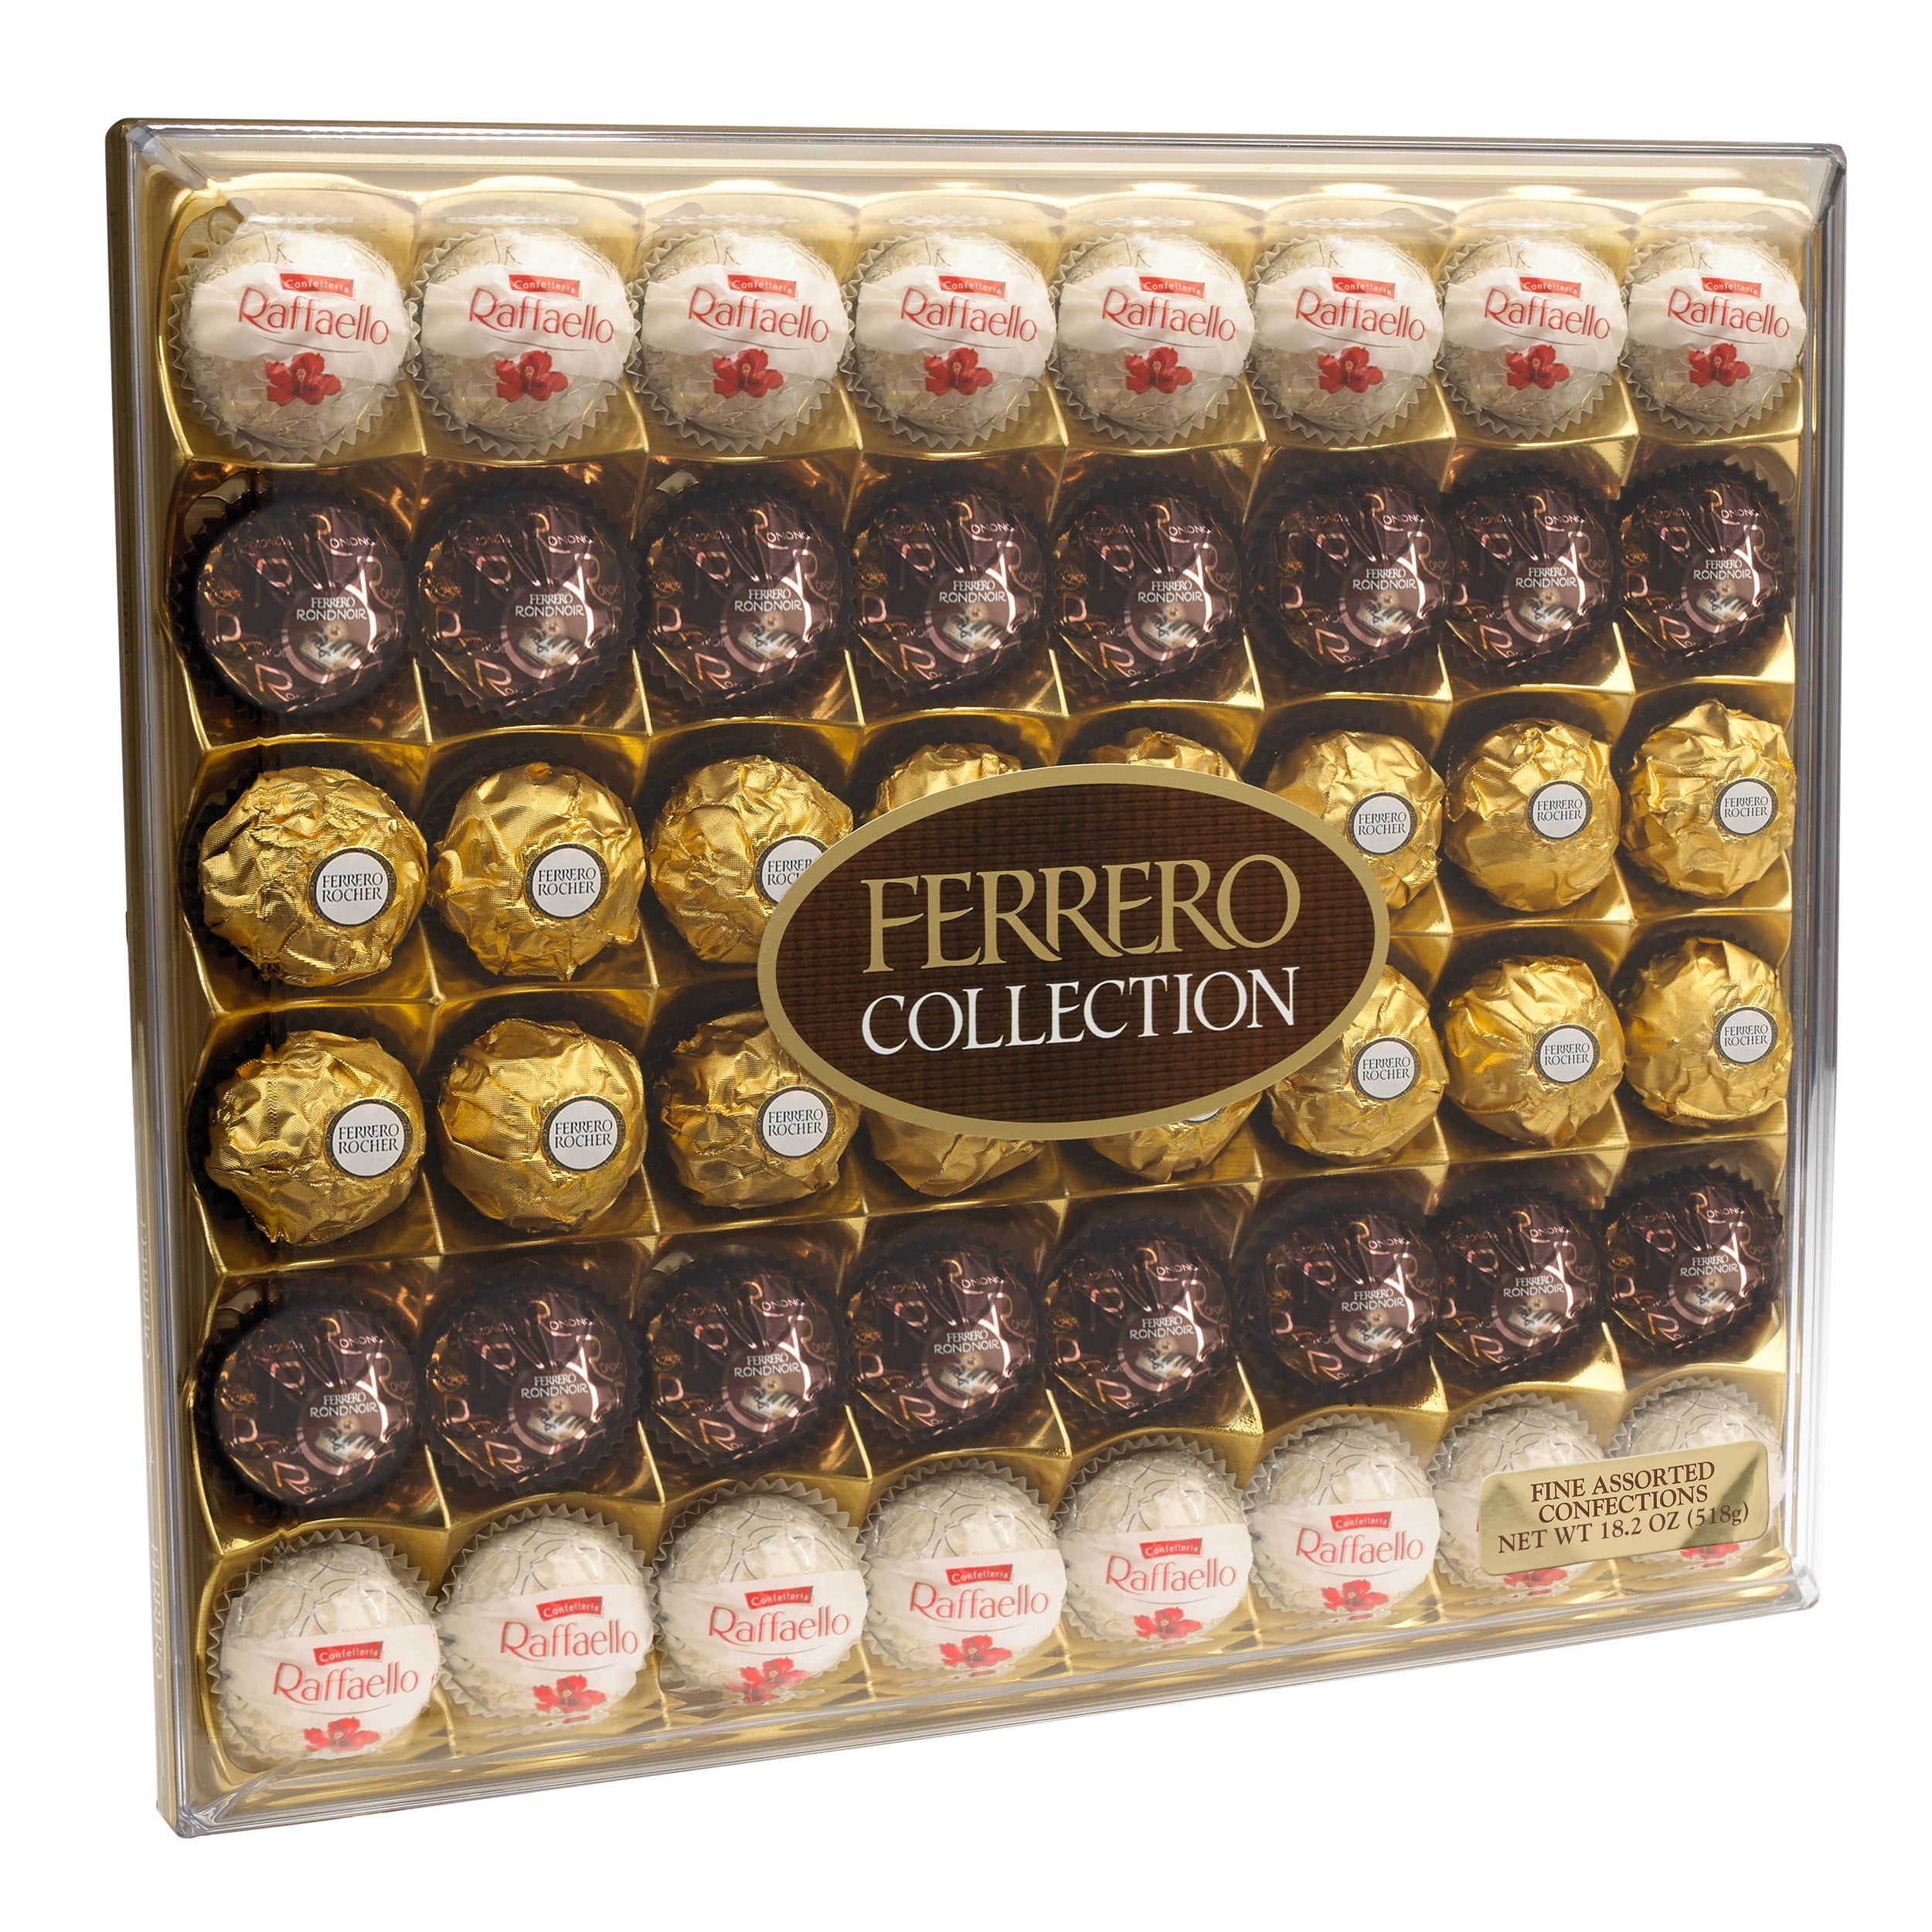 Count) Chocolate Dark Chocolate, Premium oz Easter and Great Gift, Coconut, Ferrero Gourmet 18.2 Milk A Collection Hazelnut 48 Assorted